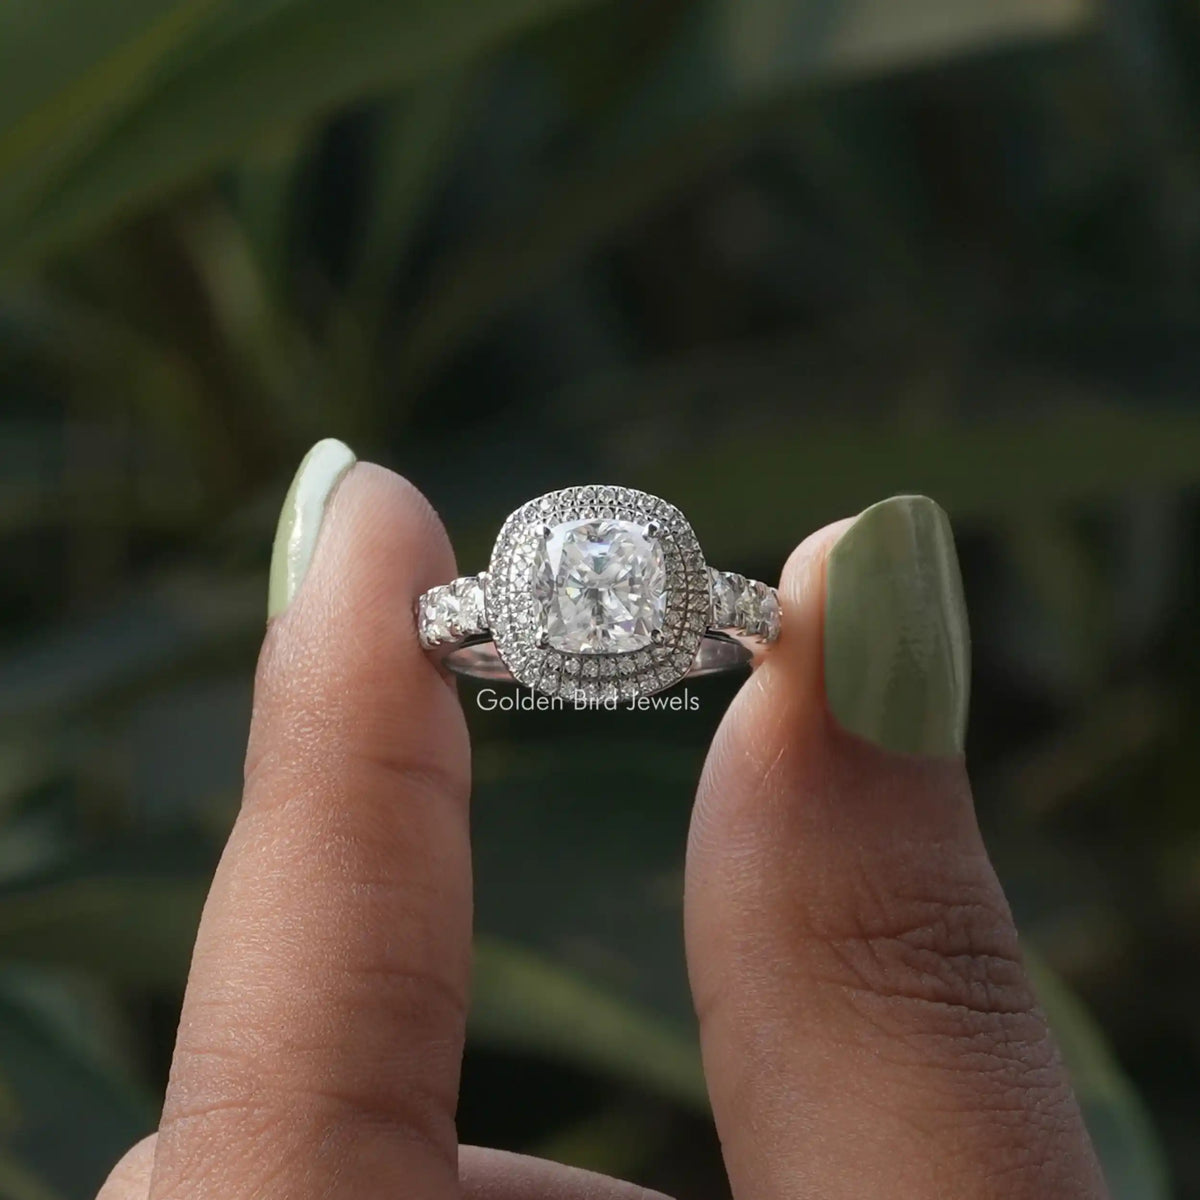 [In two finger front view cushion cut moissanite ring made of 14k white gold]-[Golden Bird Jewels]